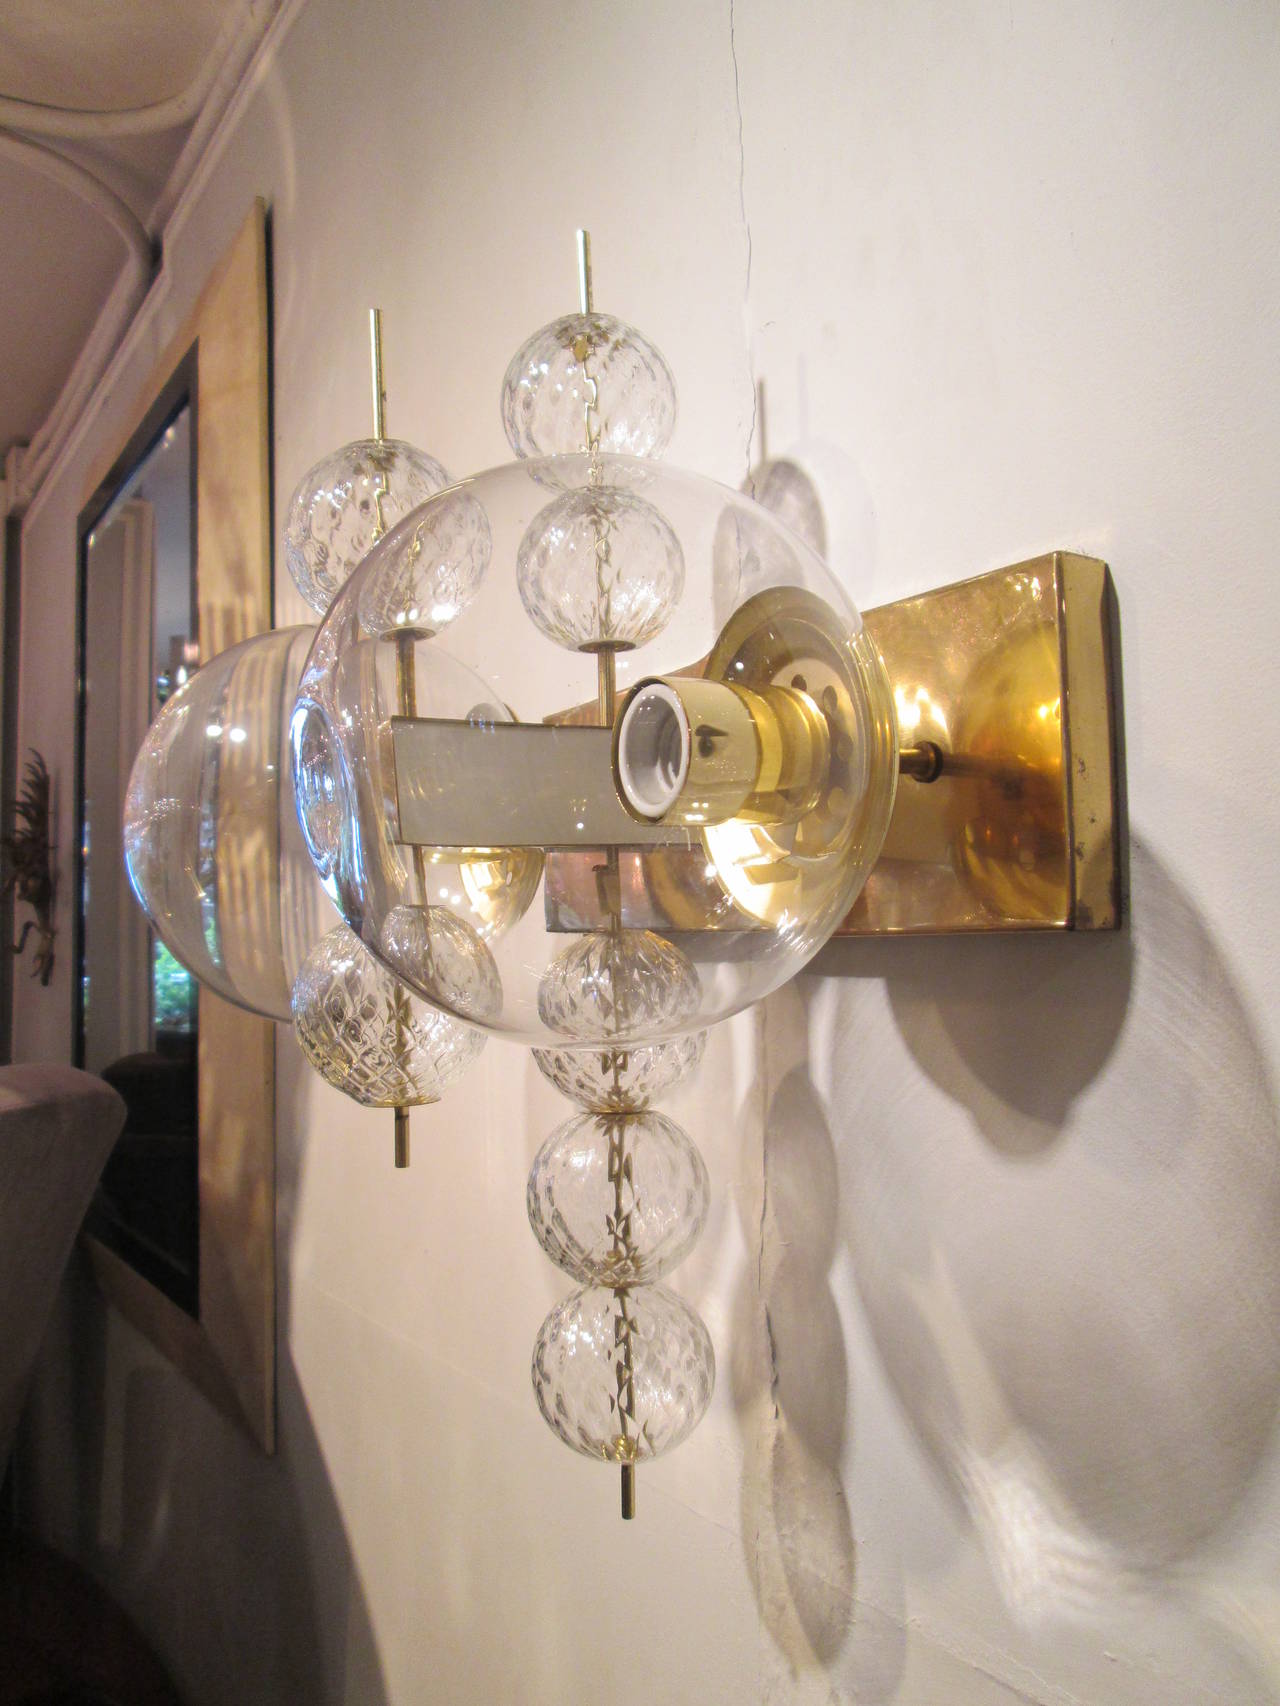 A rare pair of modern brass and glass wall sconces.